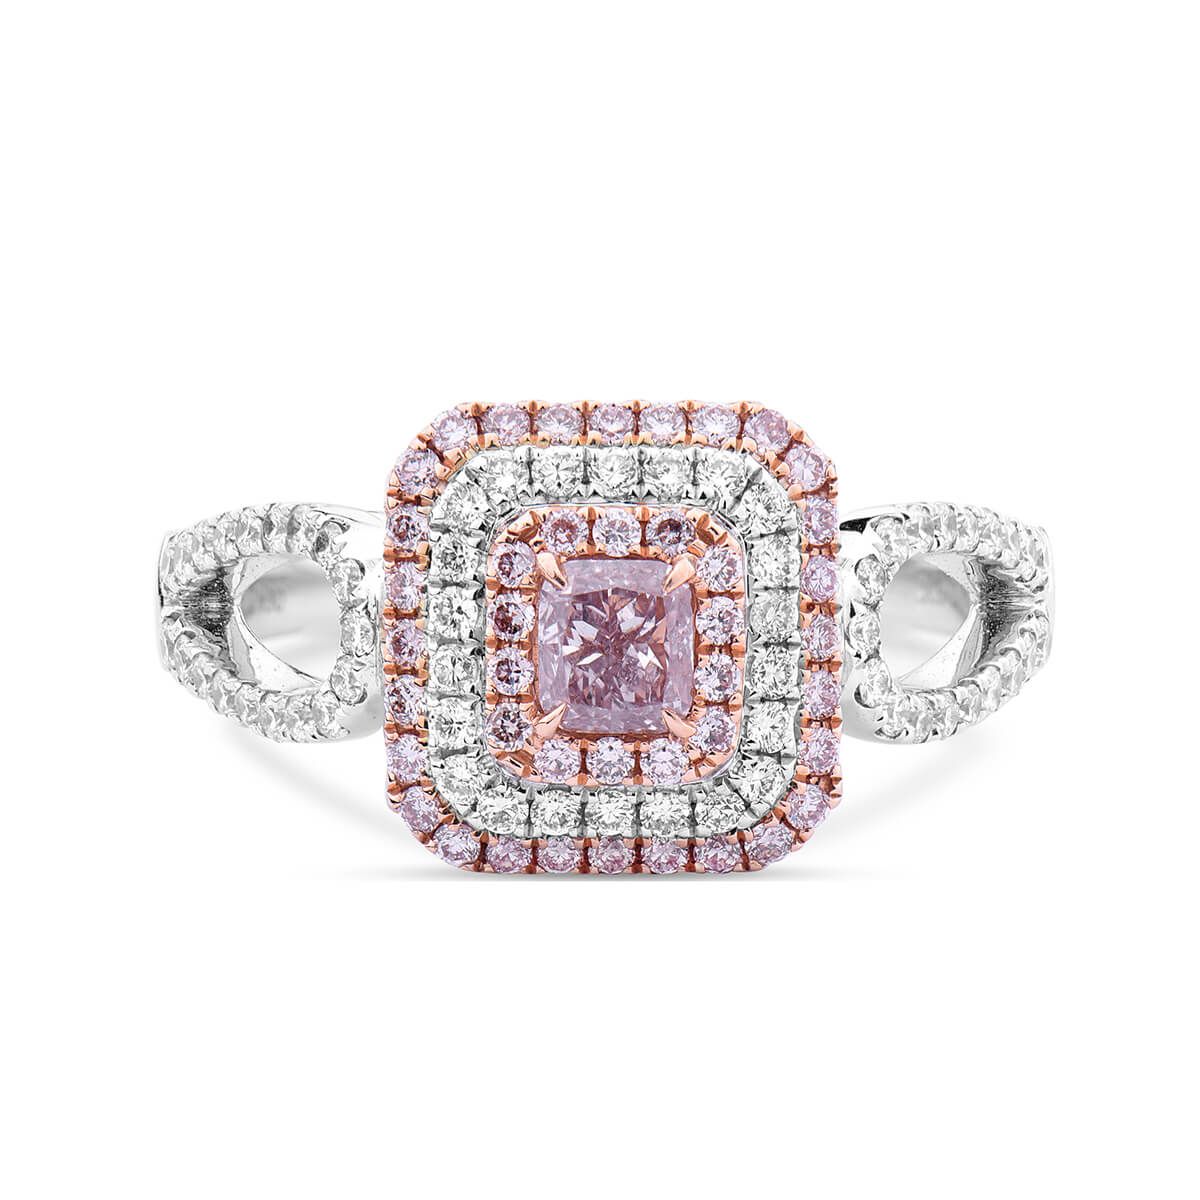 Fancy Brownish Pink Diamond Ring, 0.28 Ct. (0.87 Ct. TW), Radiant shape, GIA Certified, 2185351636